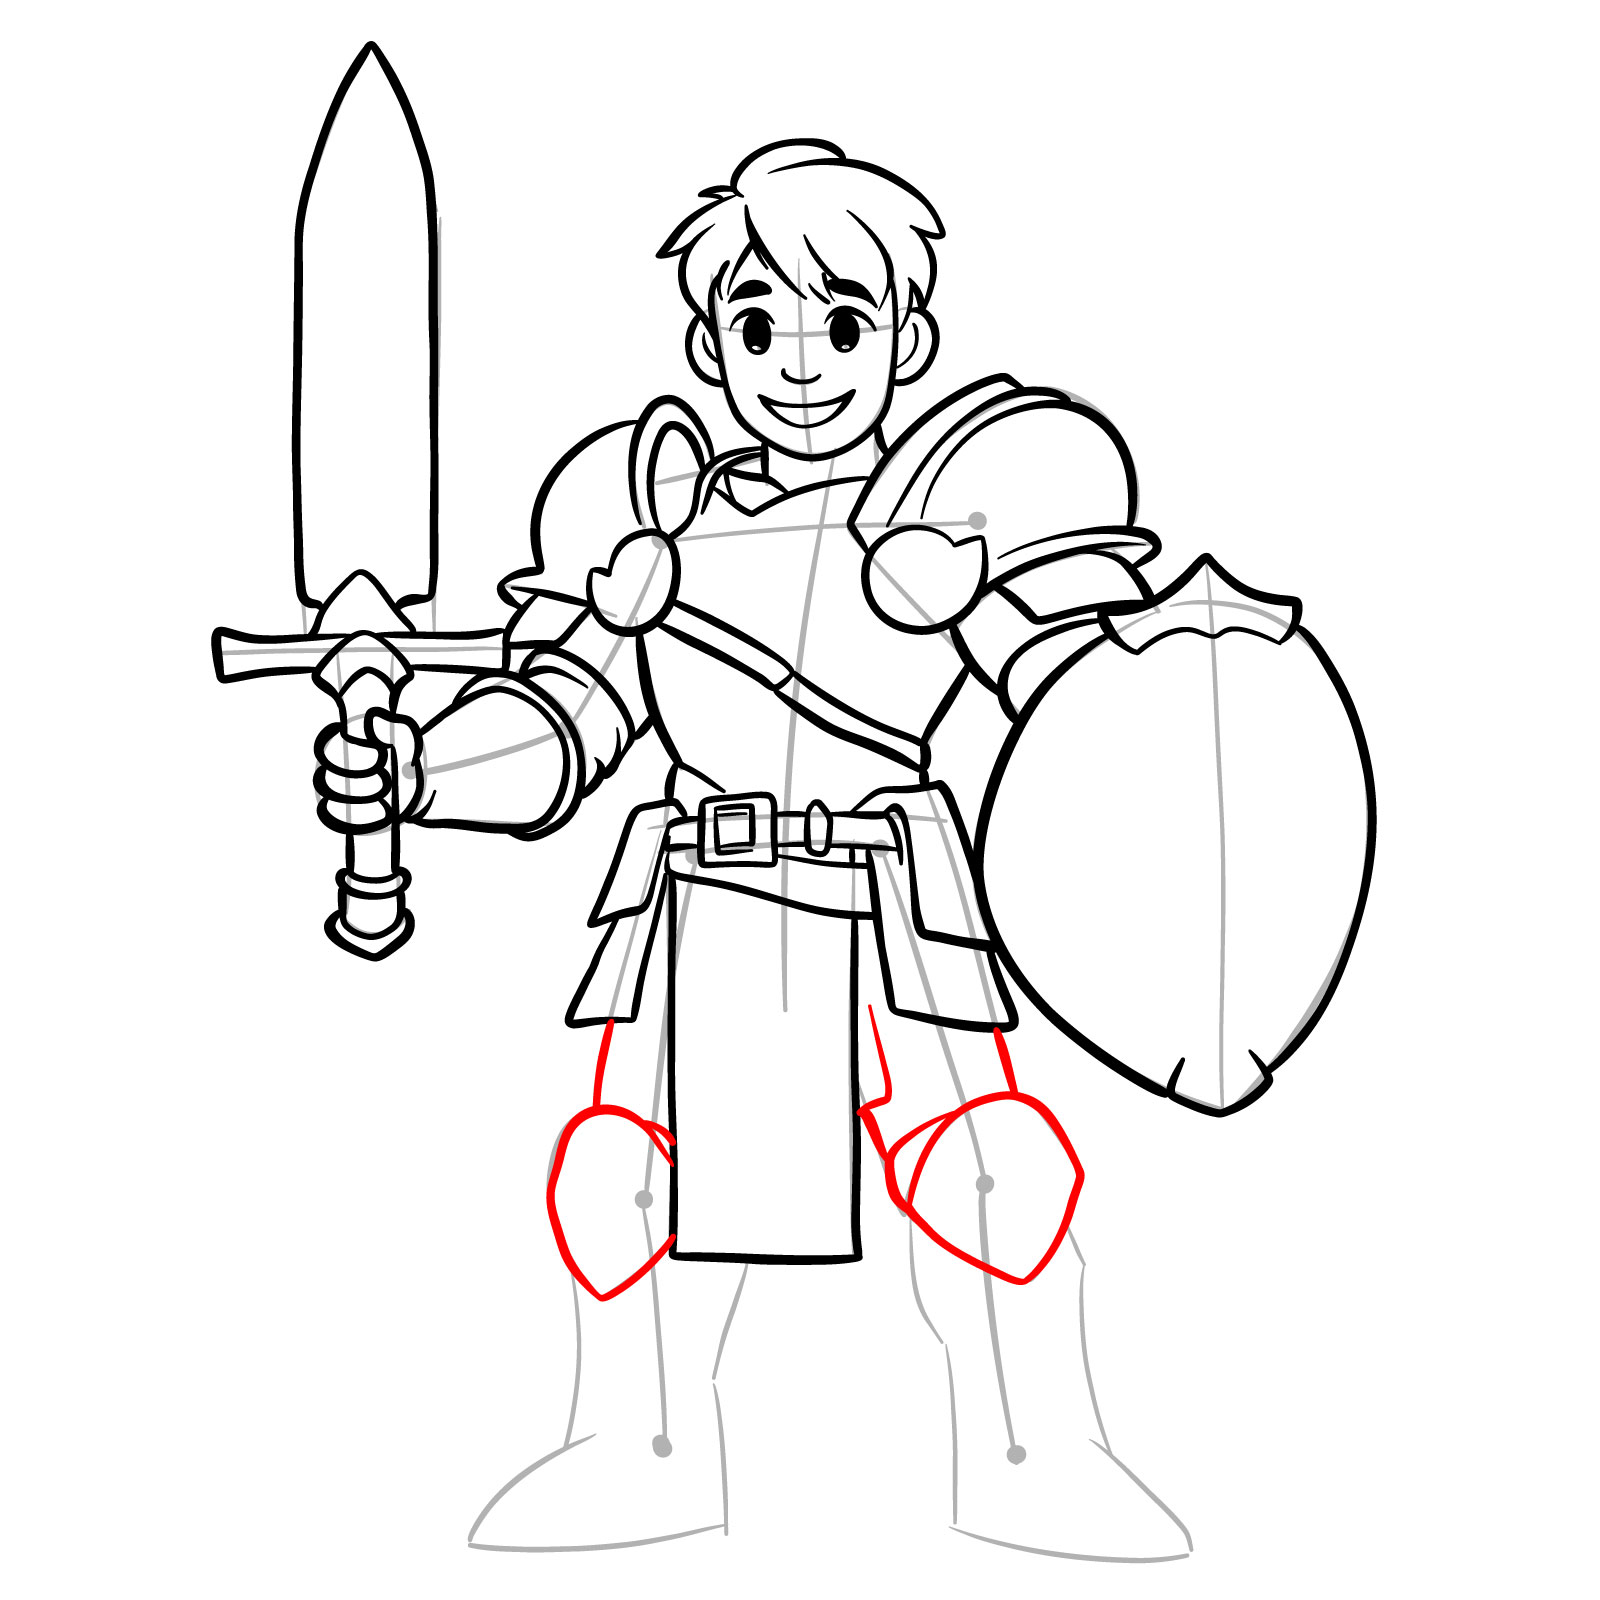 How to draw a paladin step 18: sketching upper legs